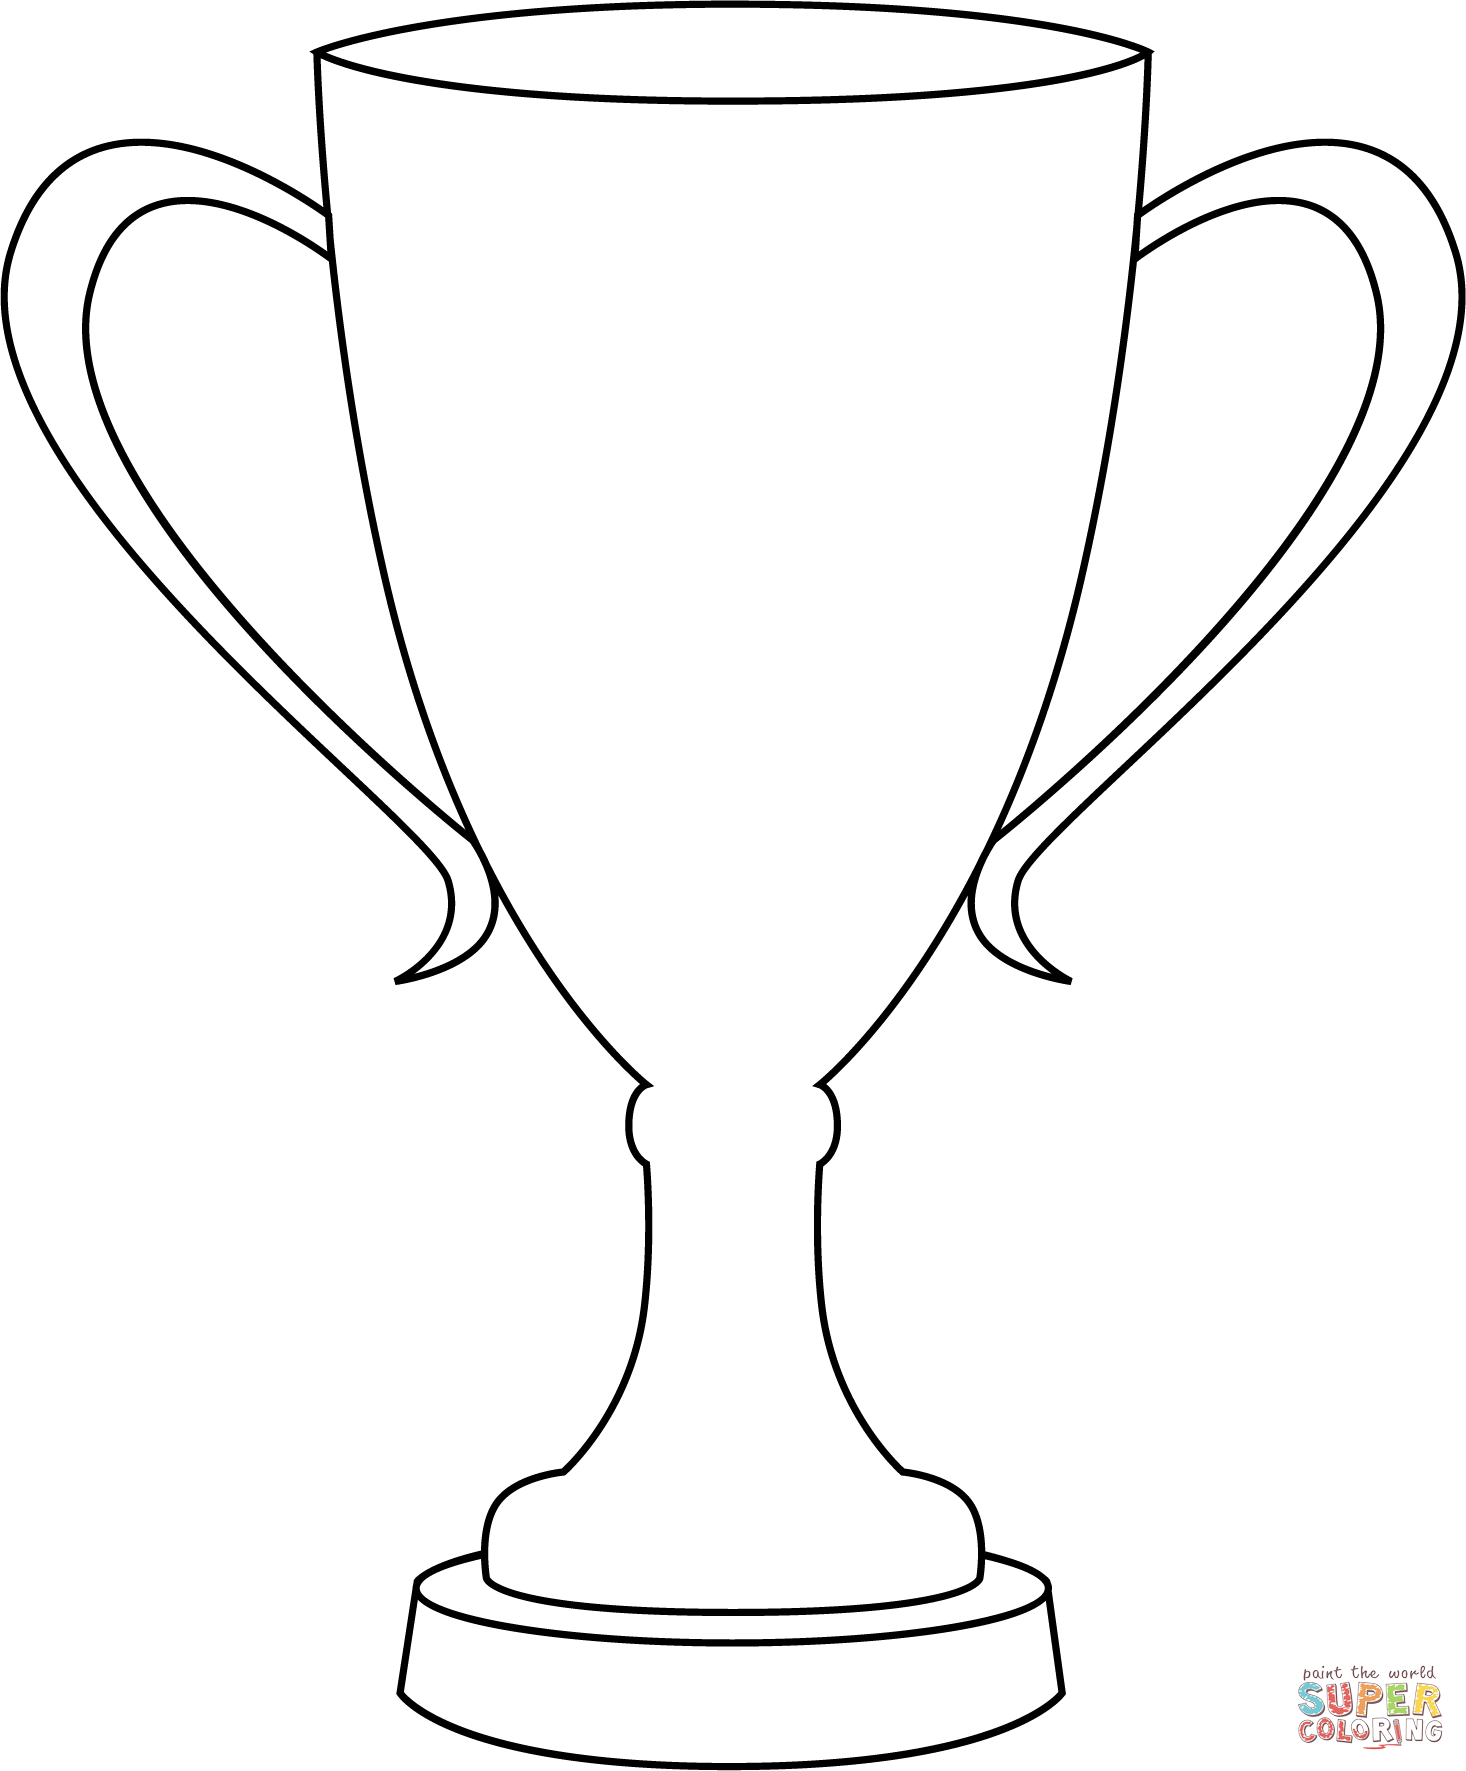 Trophy coloring page free printable coloring pages